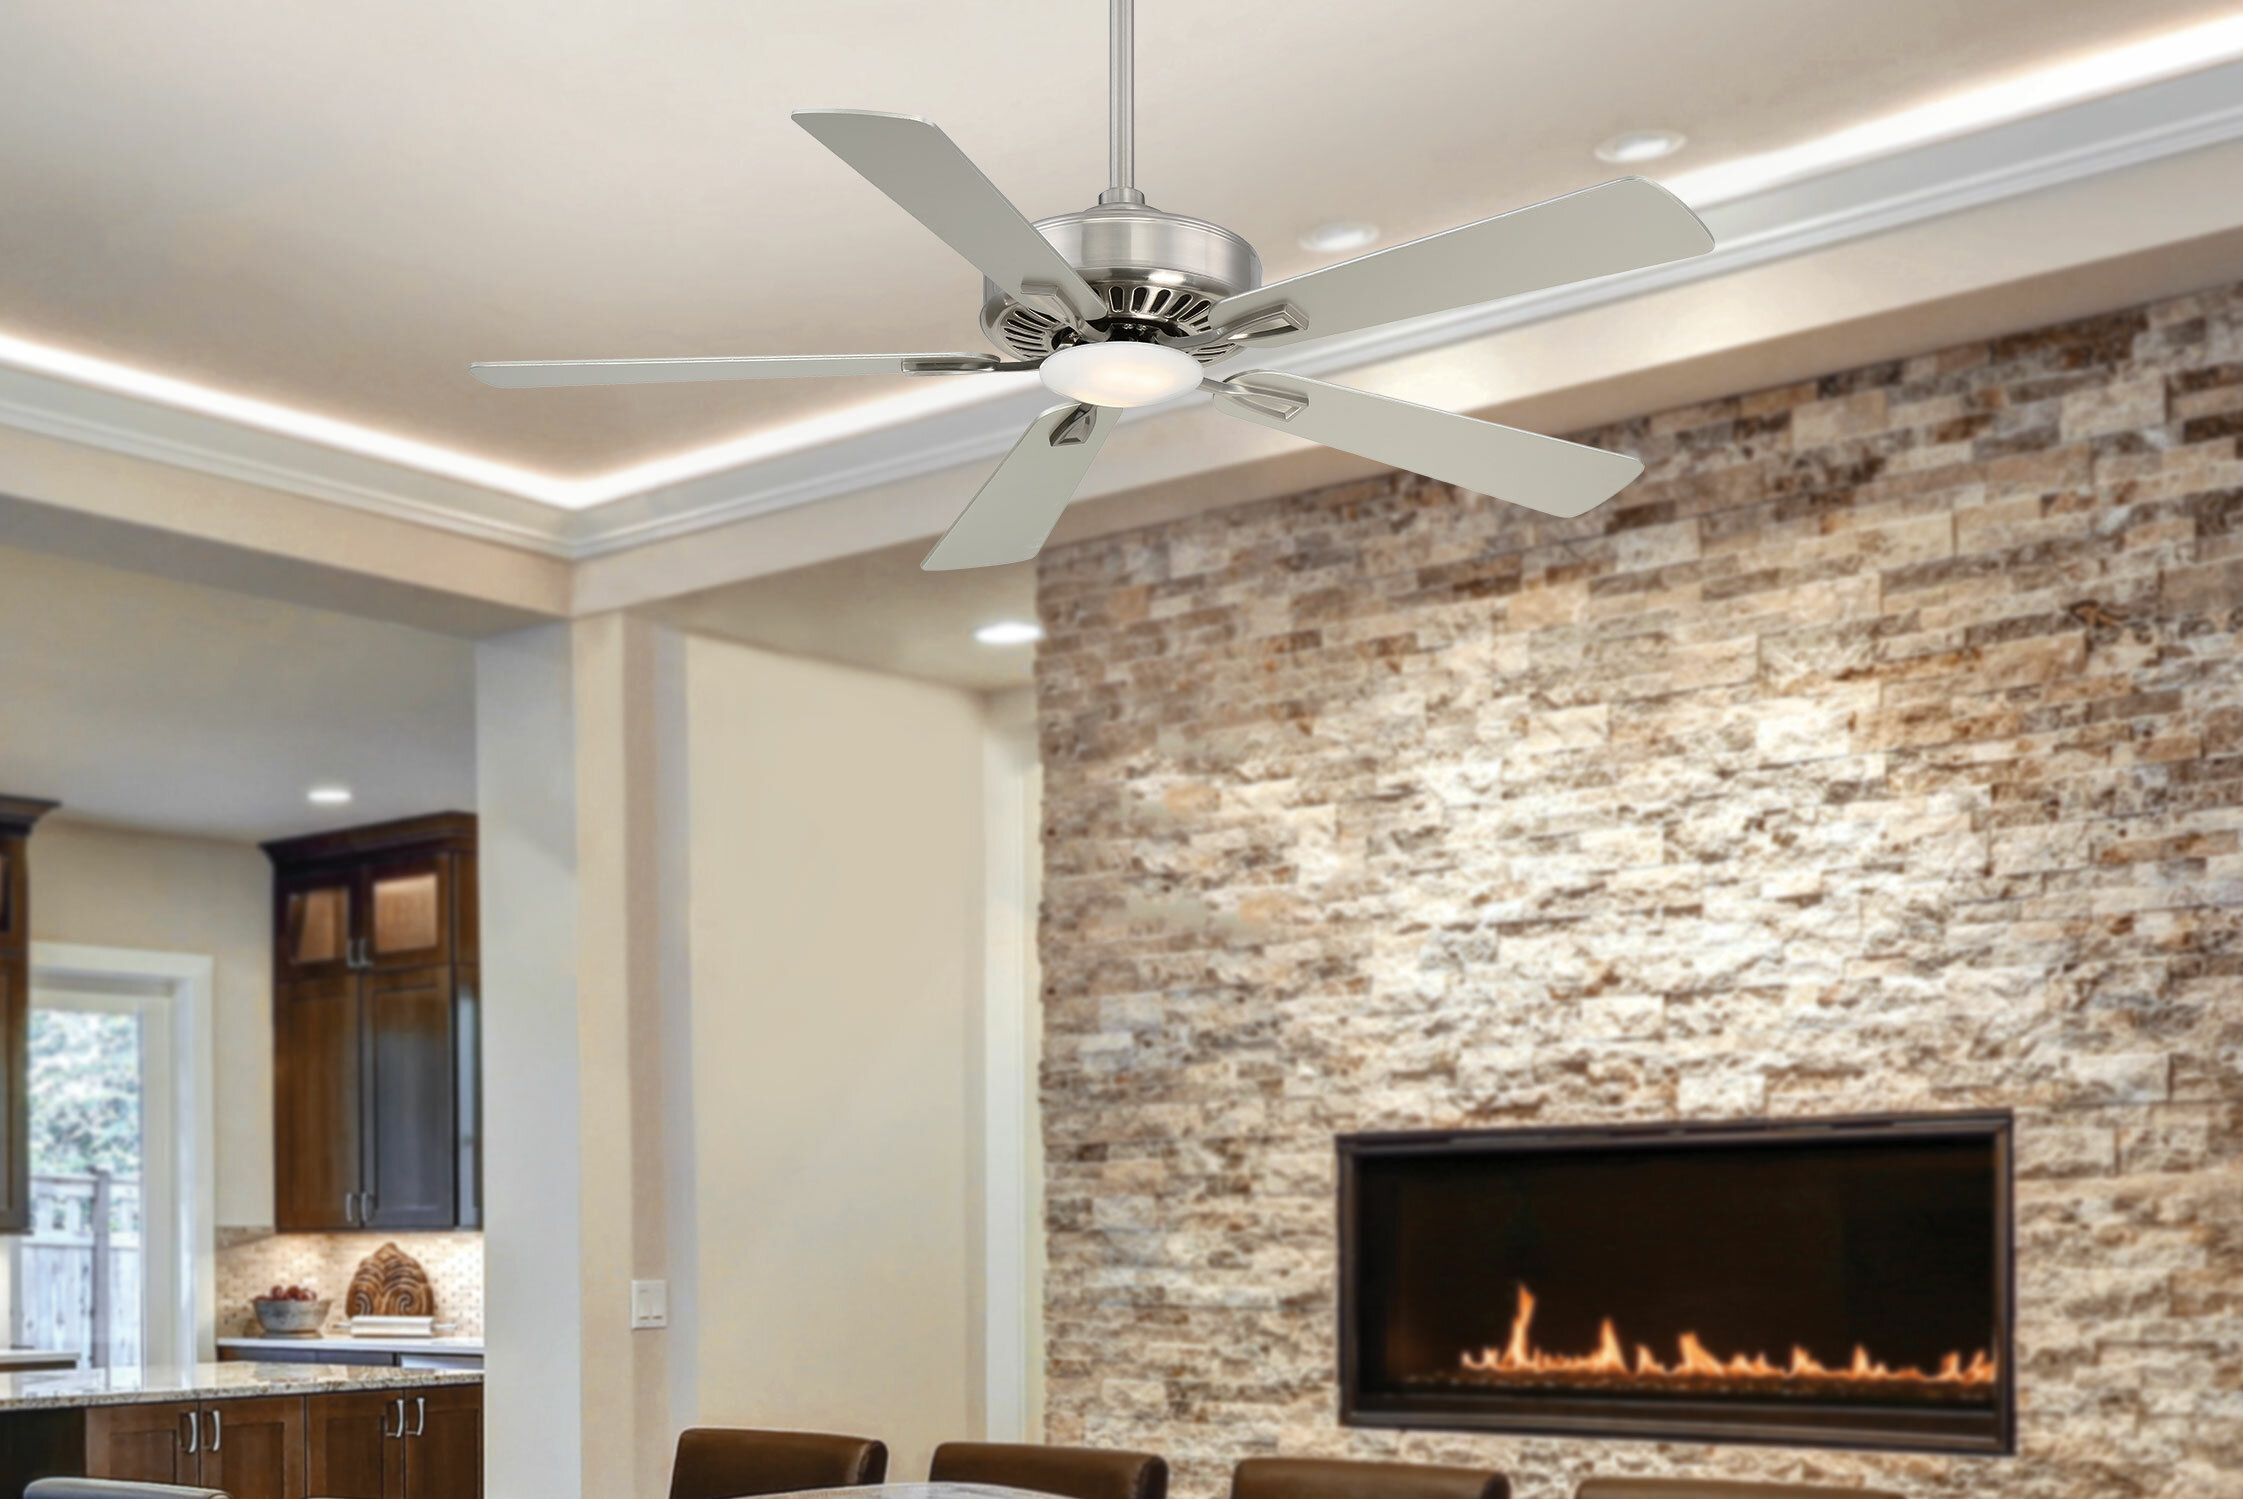 Contractor Bowl 5 Blade Ceiling Fan With Remote within dimensions 2243 X 1499